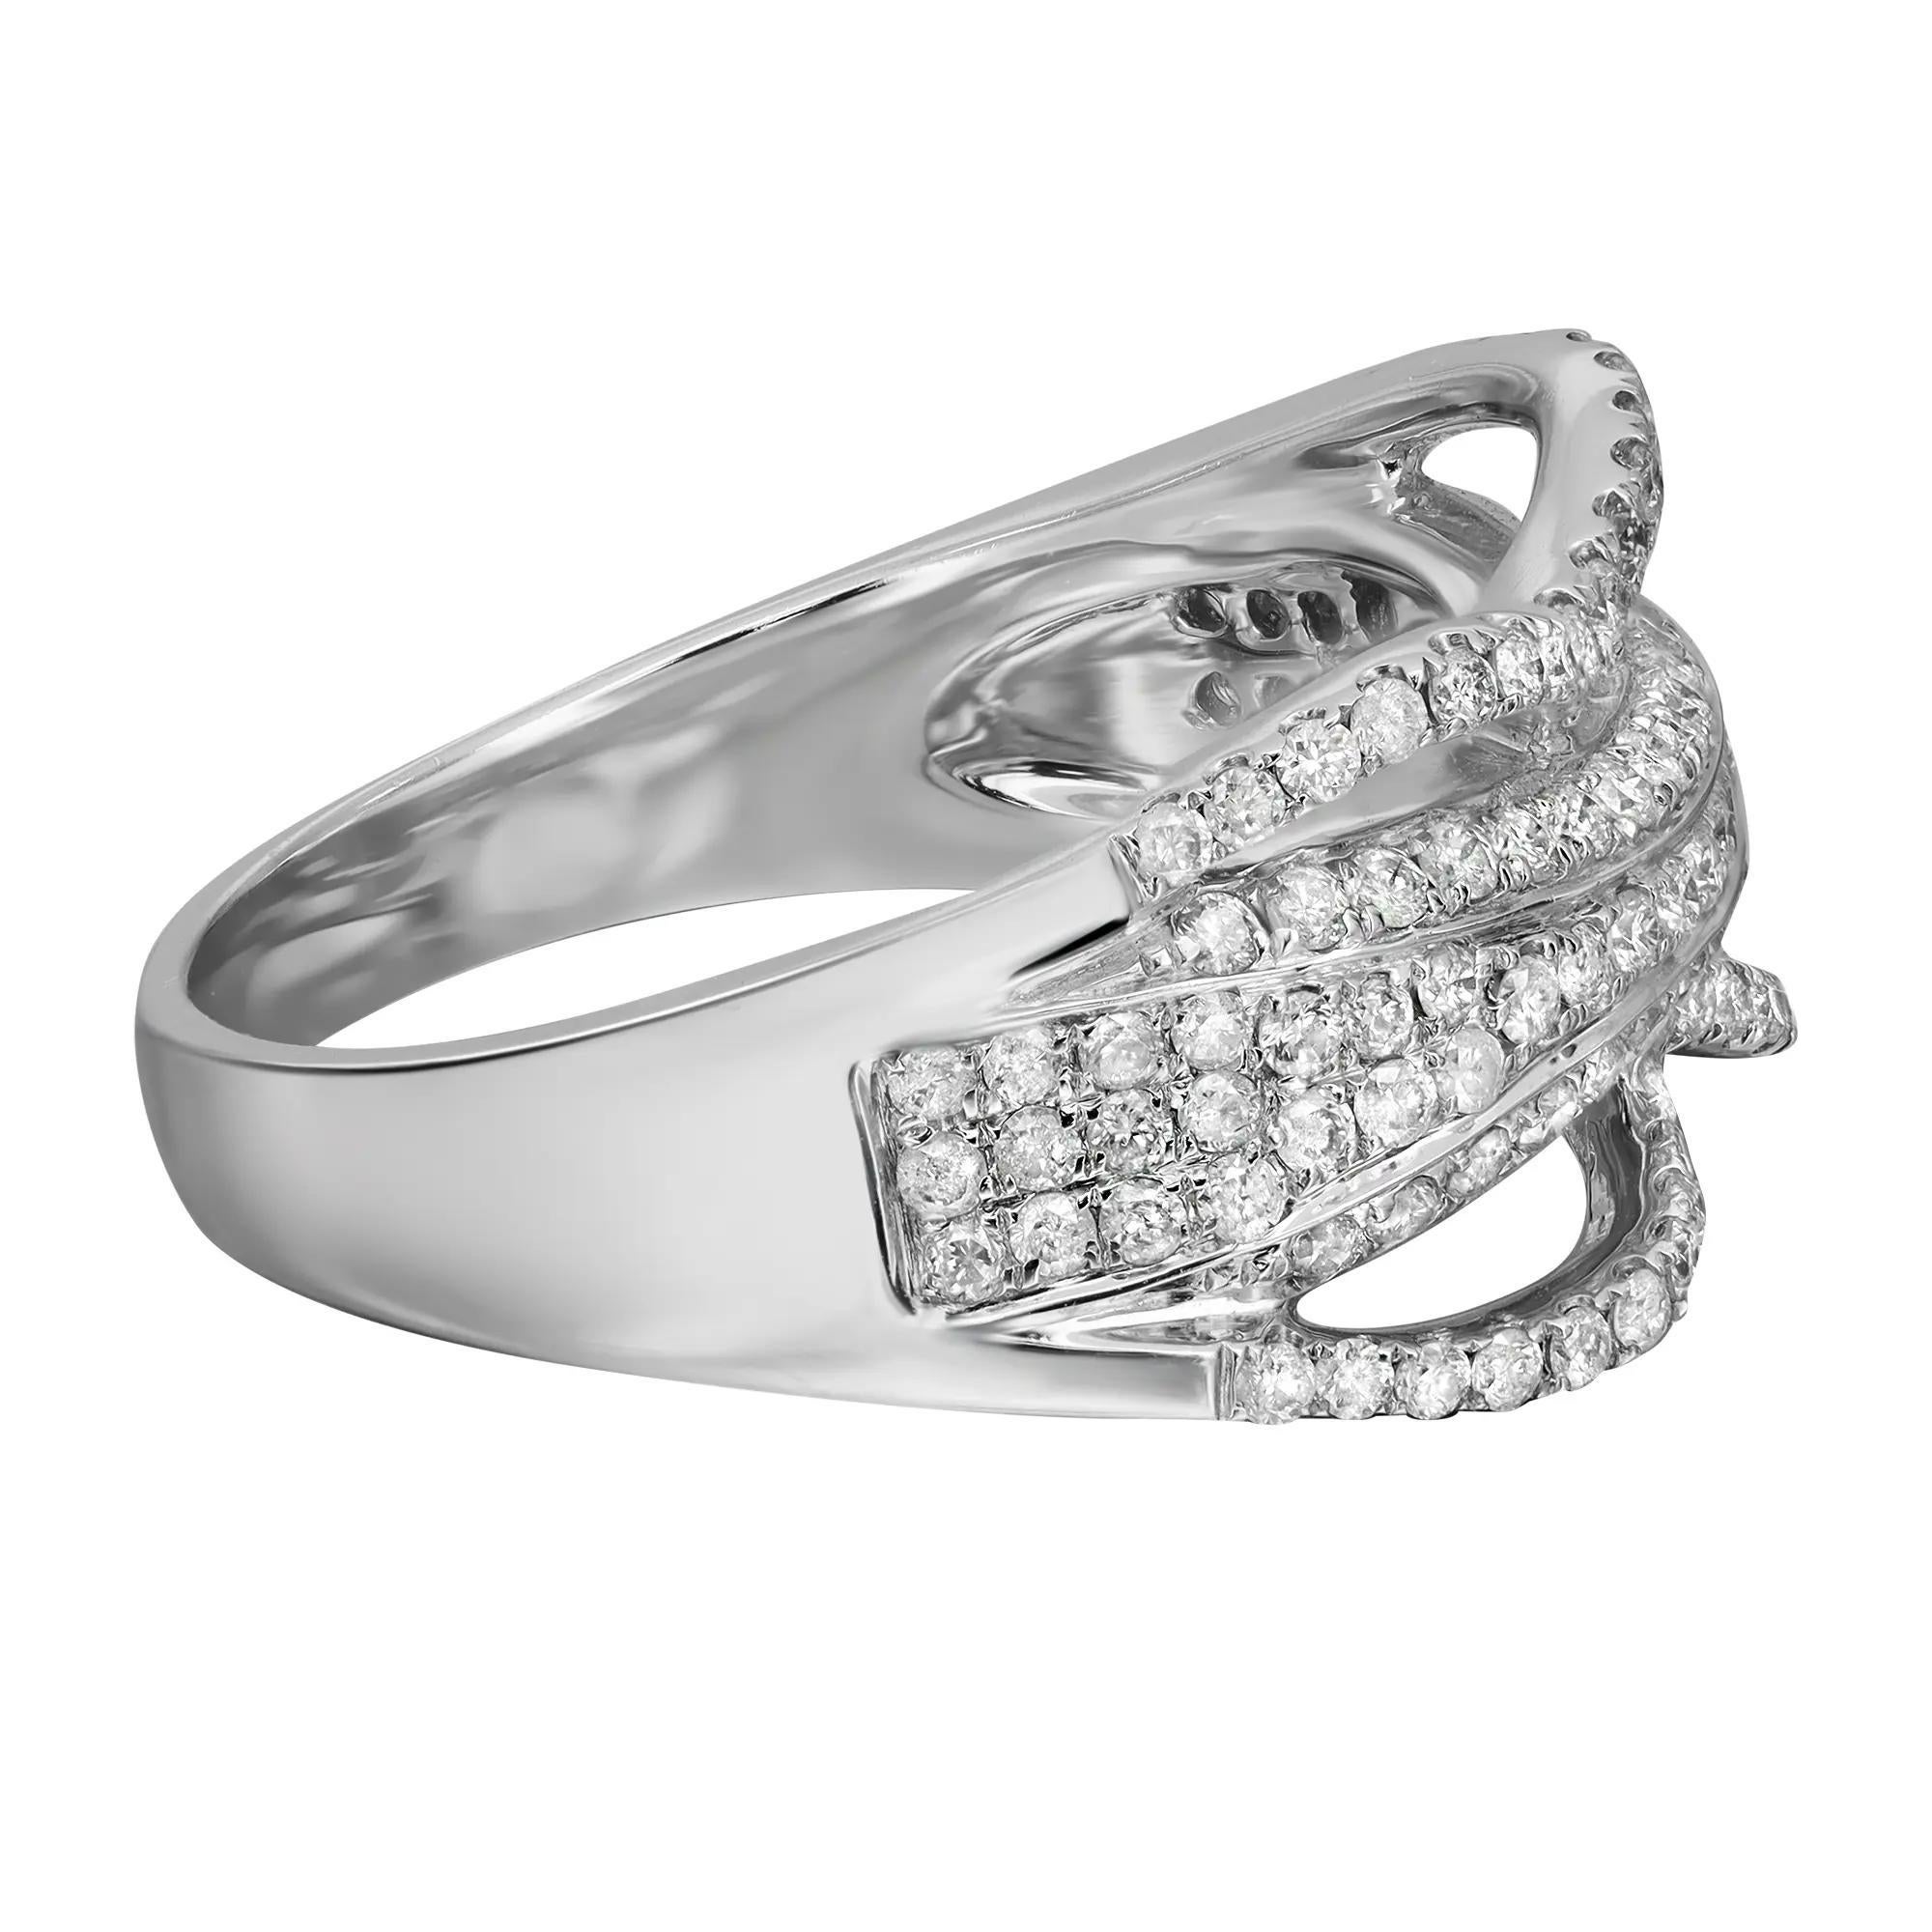 This beautiful ladies cocktail ring features prong set round cut sparkling diamonds weighing 0.83 carat. Diamond color I and clarity SI. Crafted in high polish 14K white gold. This elegant timeless design is a perfect fit for any occasion. Ring size